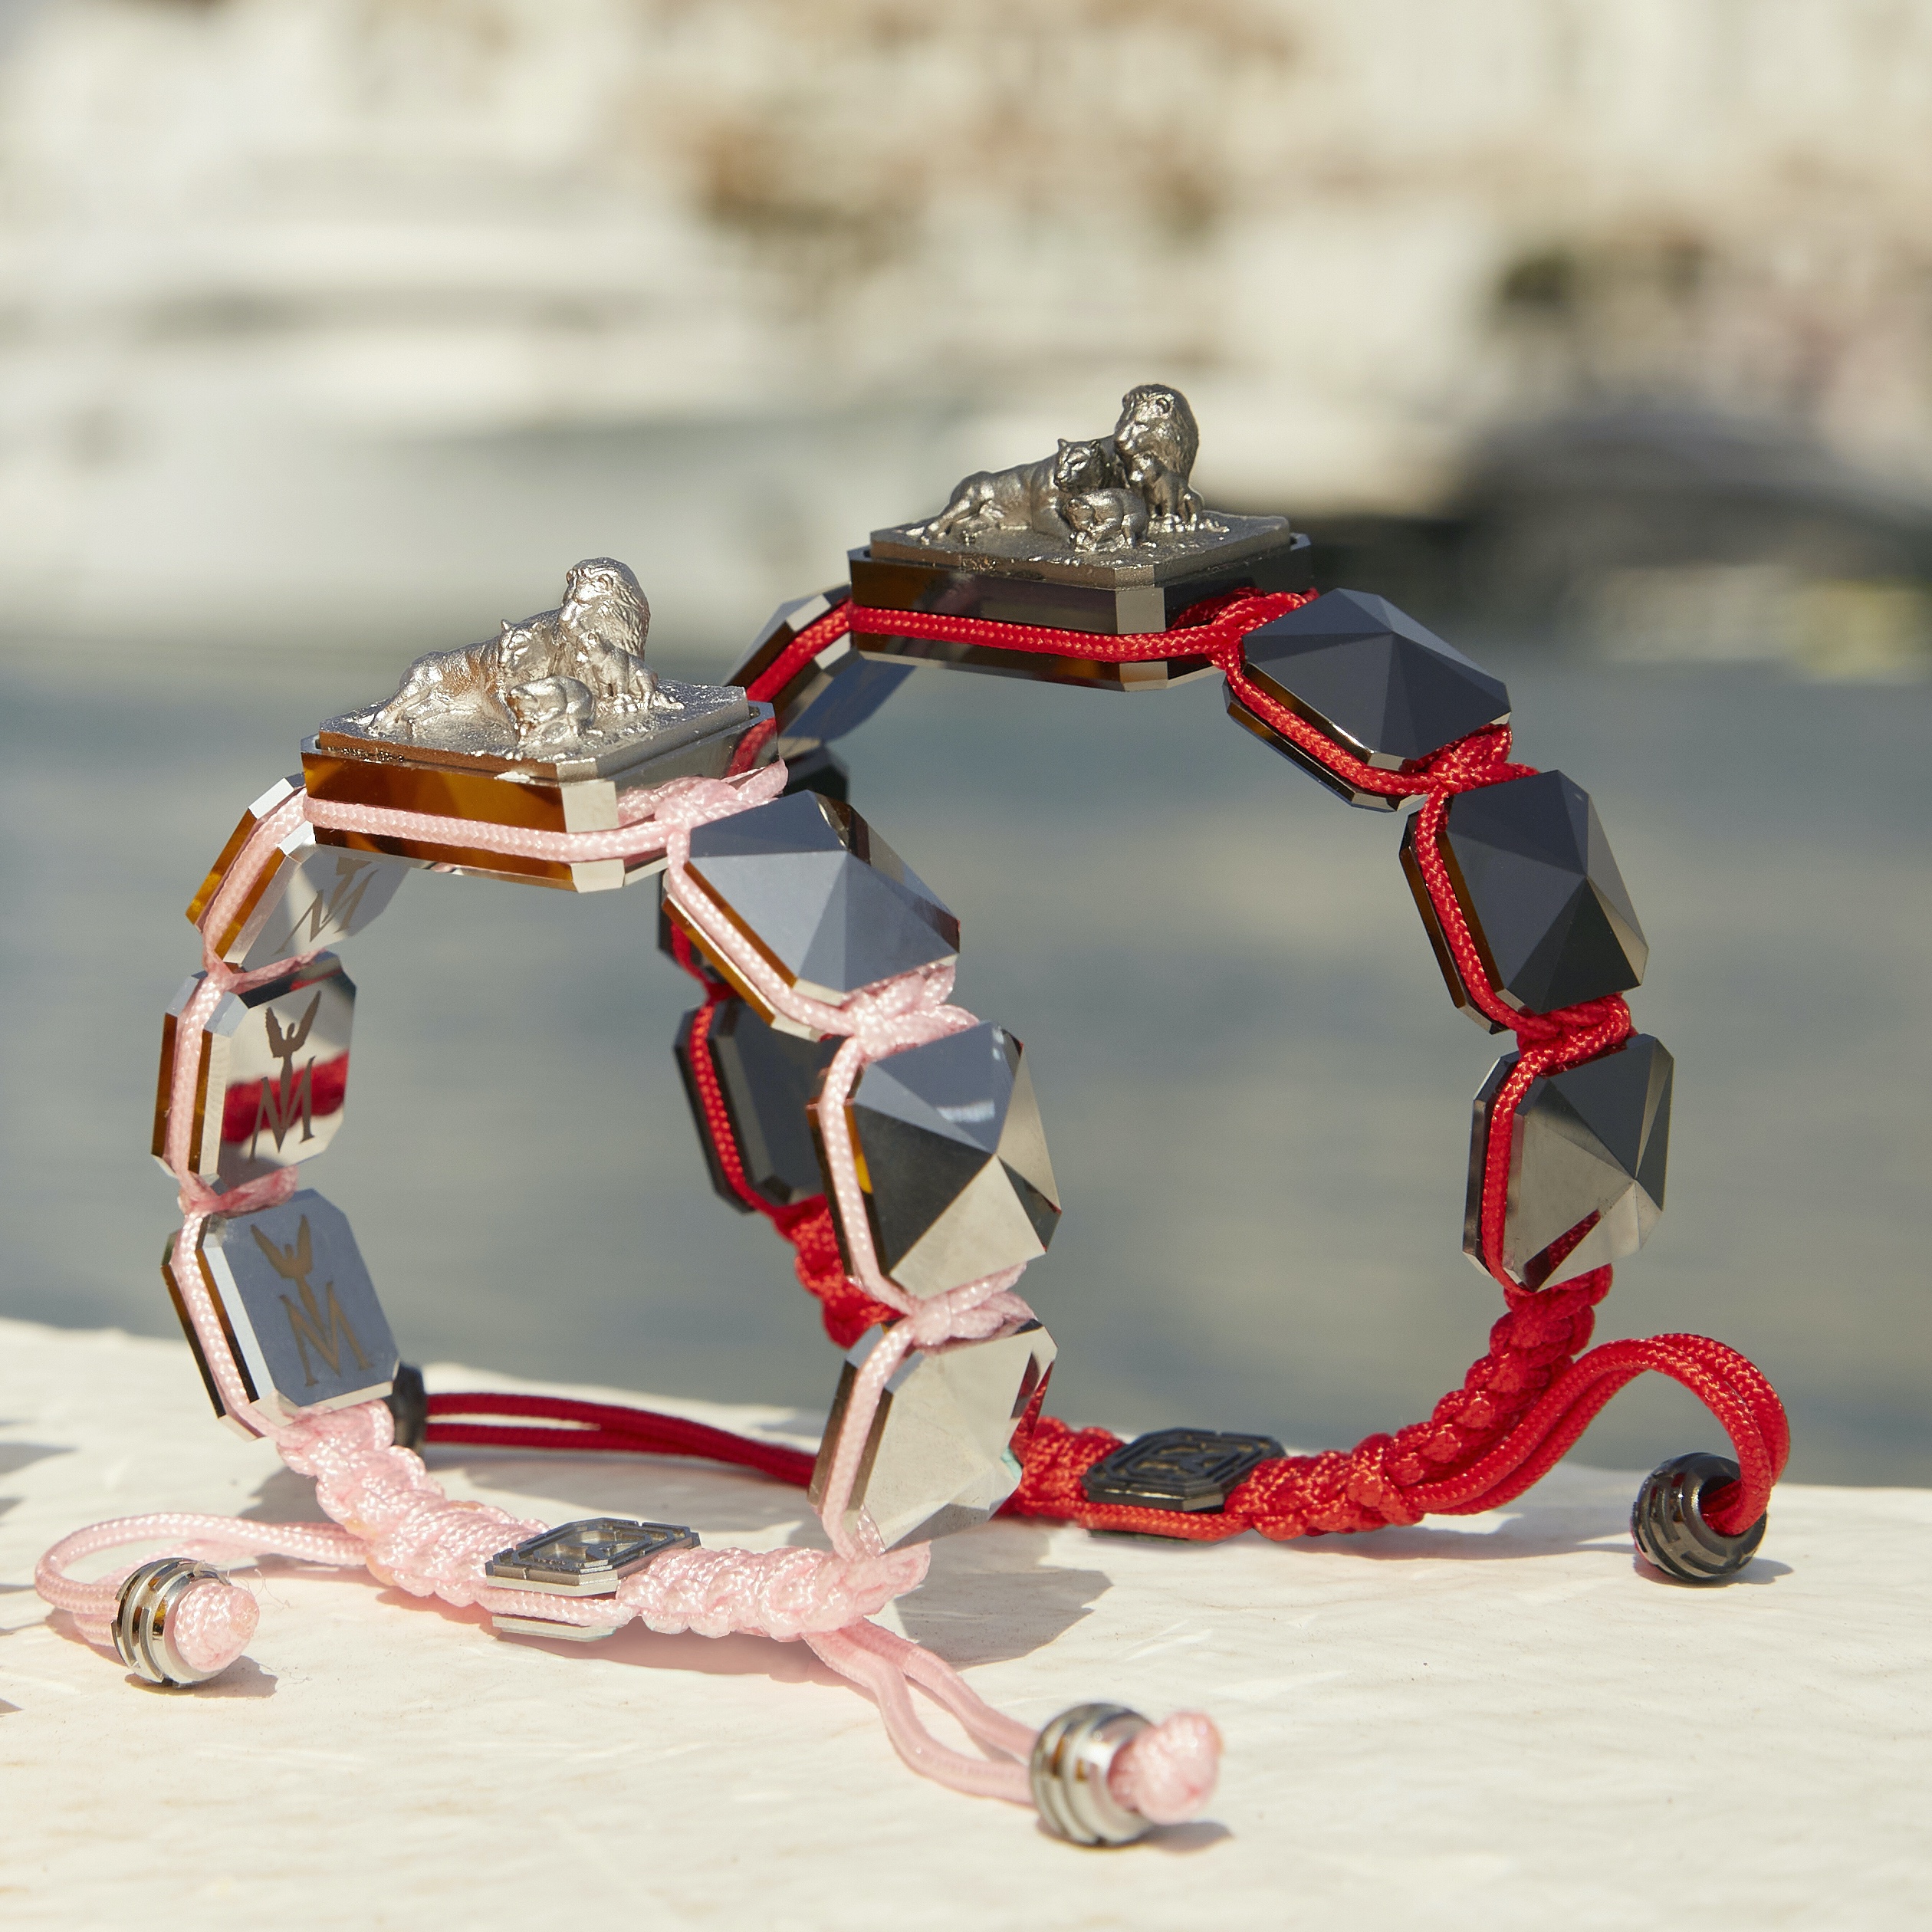 Miss You bracelet with black ceramic and sculpture finished in anthracite color complemented with a red coloured cord.